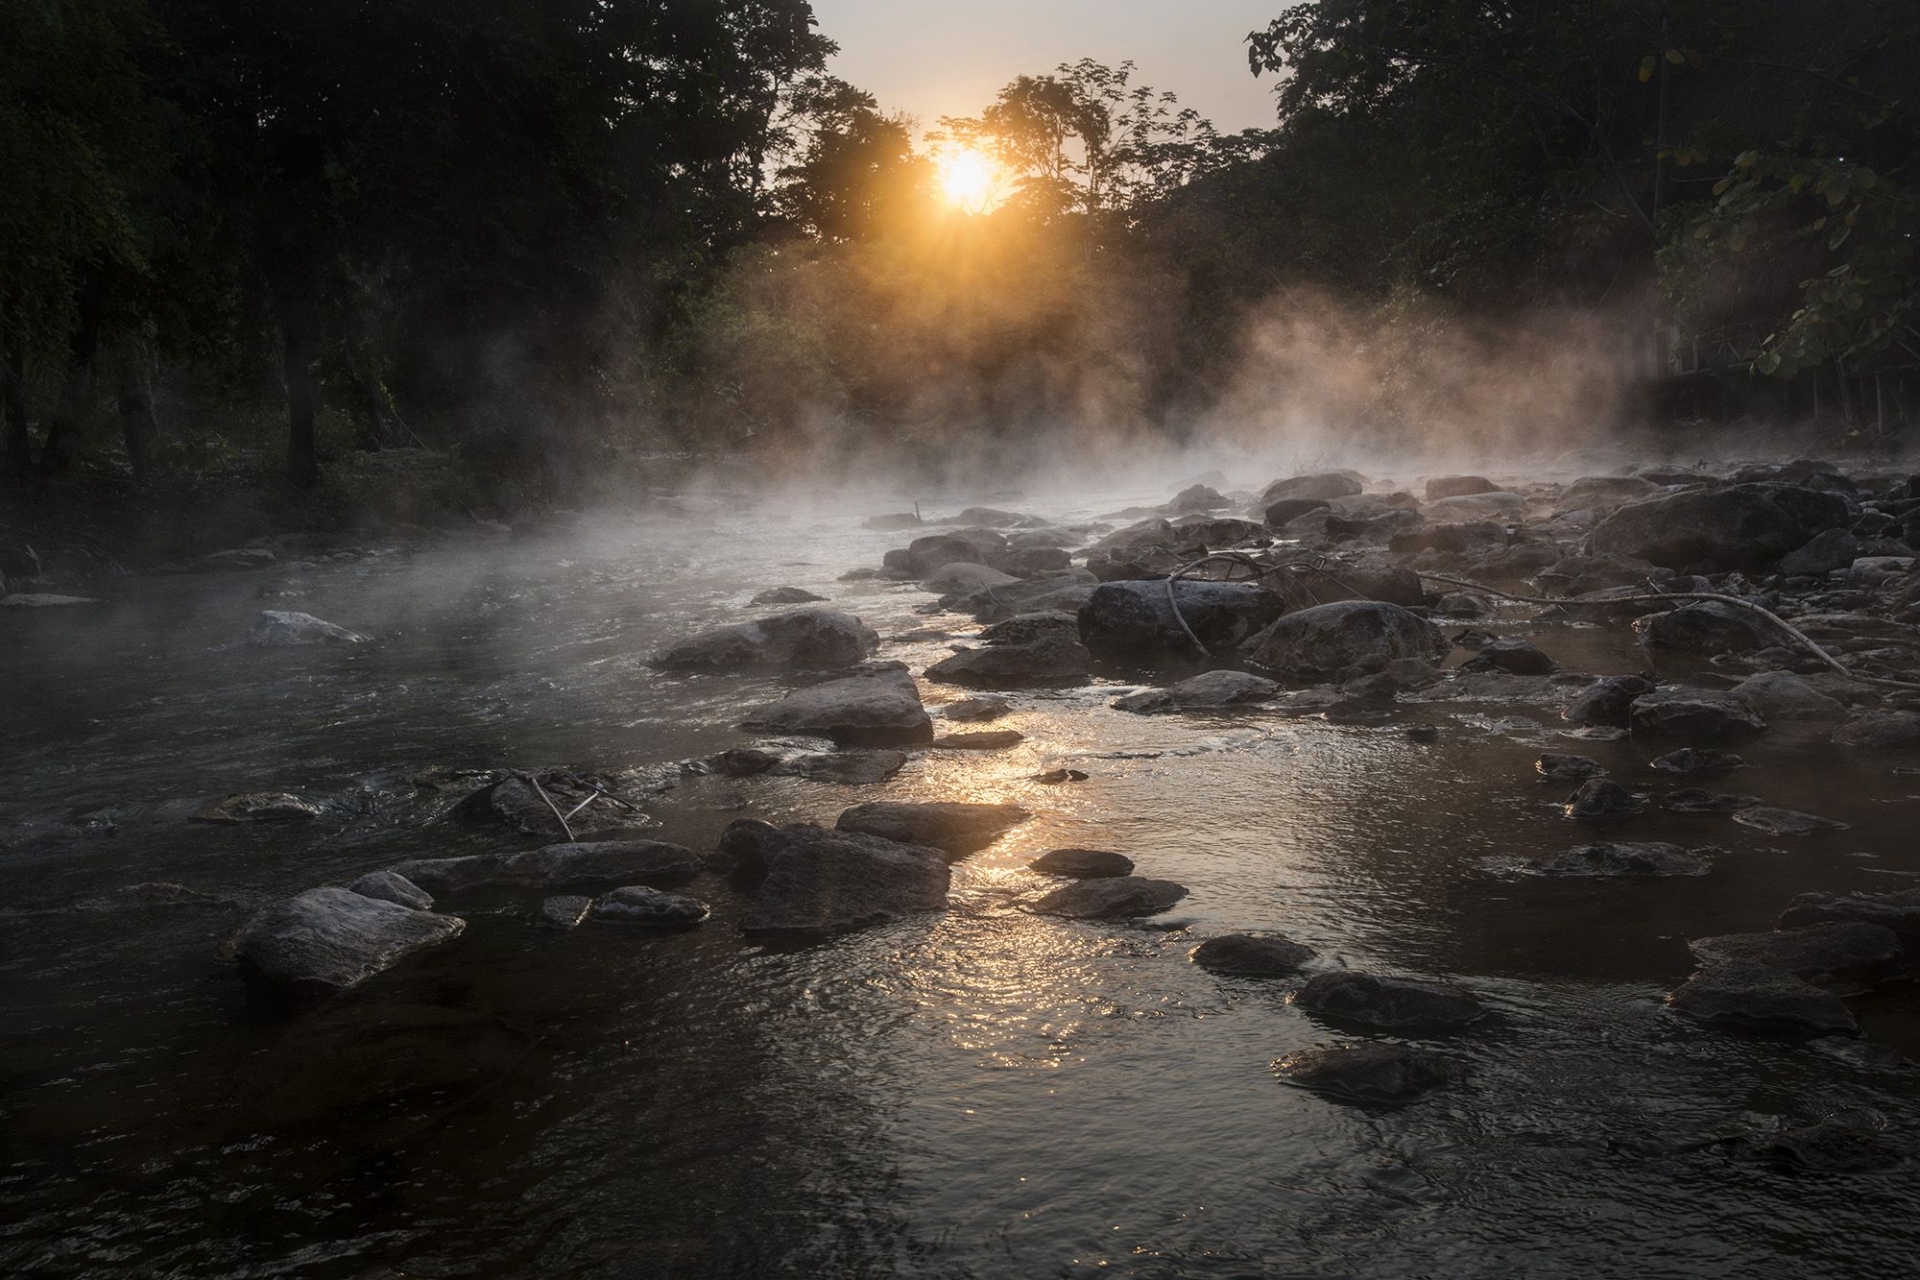 ONLY IN PERU: Shanay Timpishka River-the boiling river.